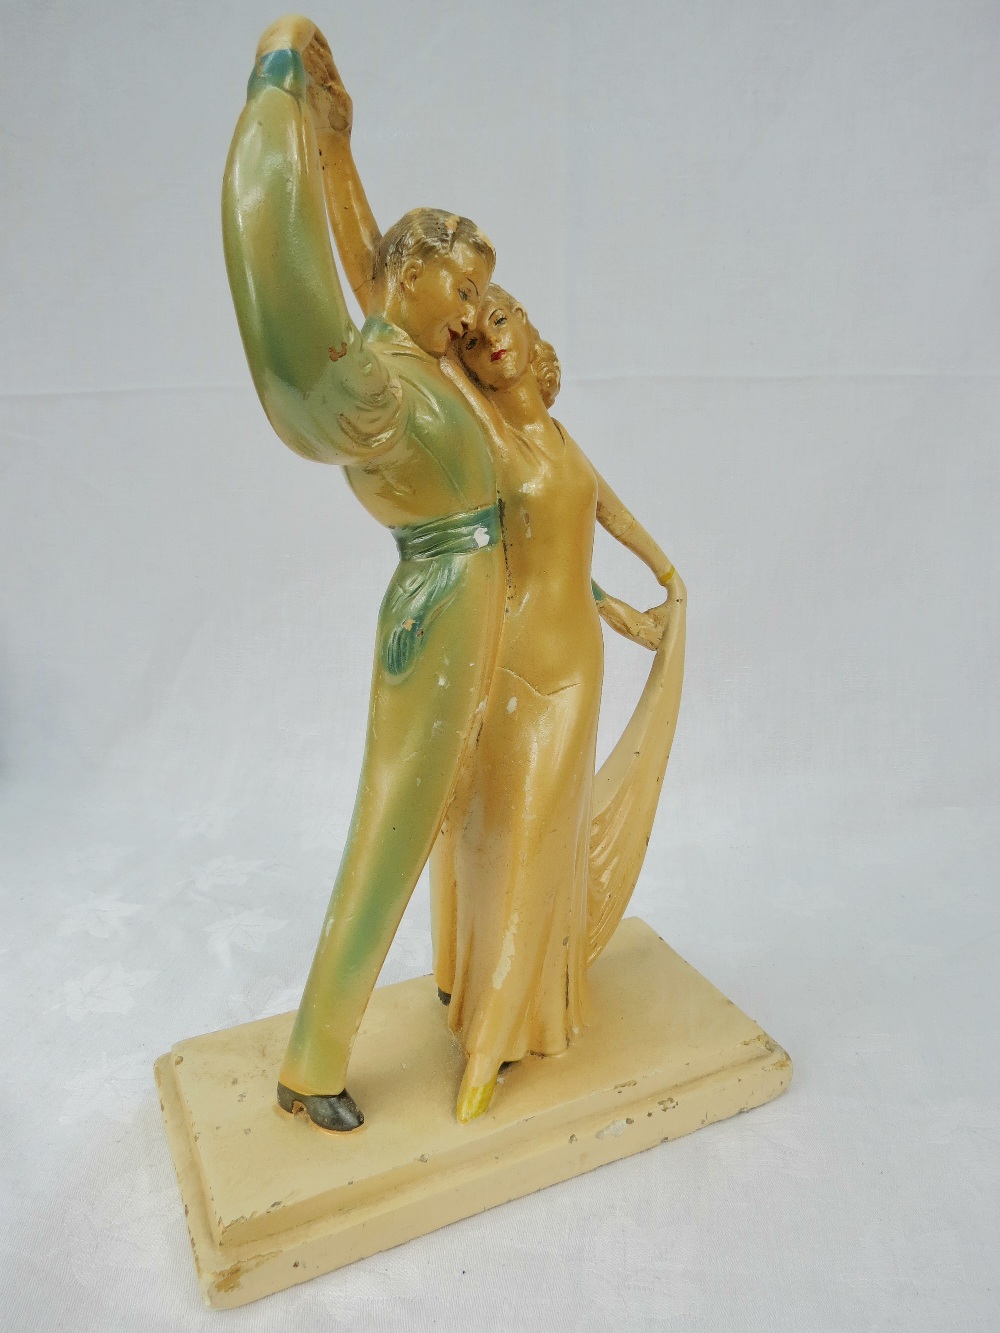 An art deco chalkware figurine group of two dancers by Rooksyn, 13"